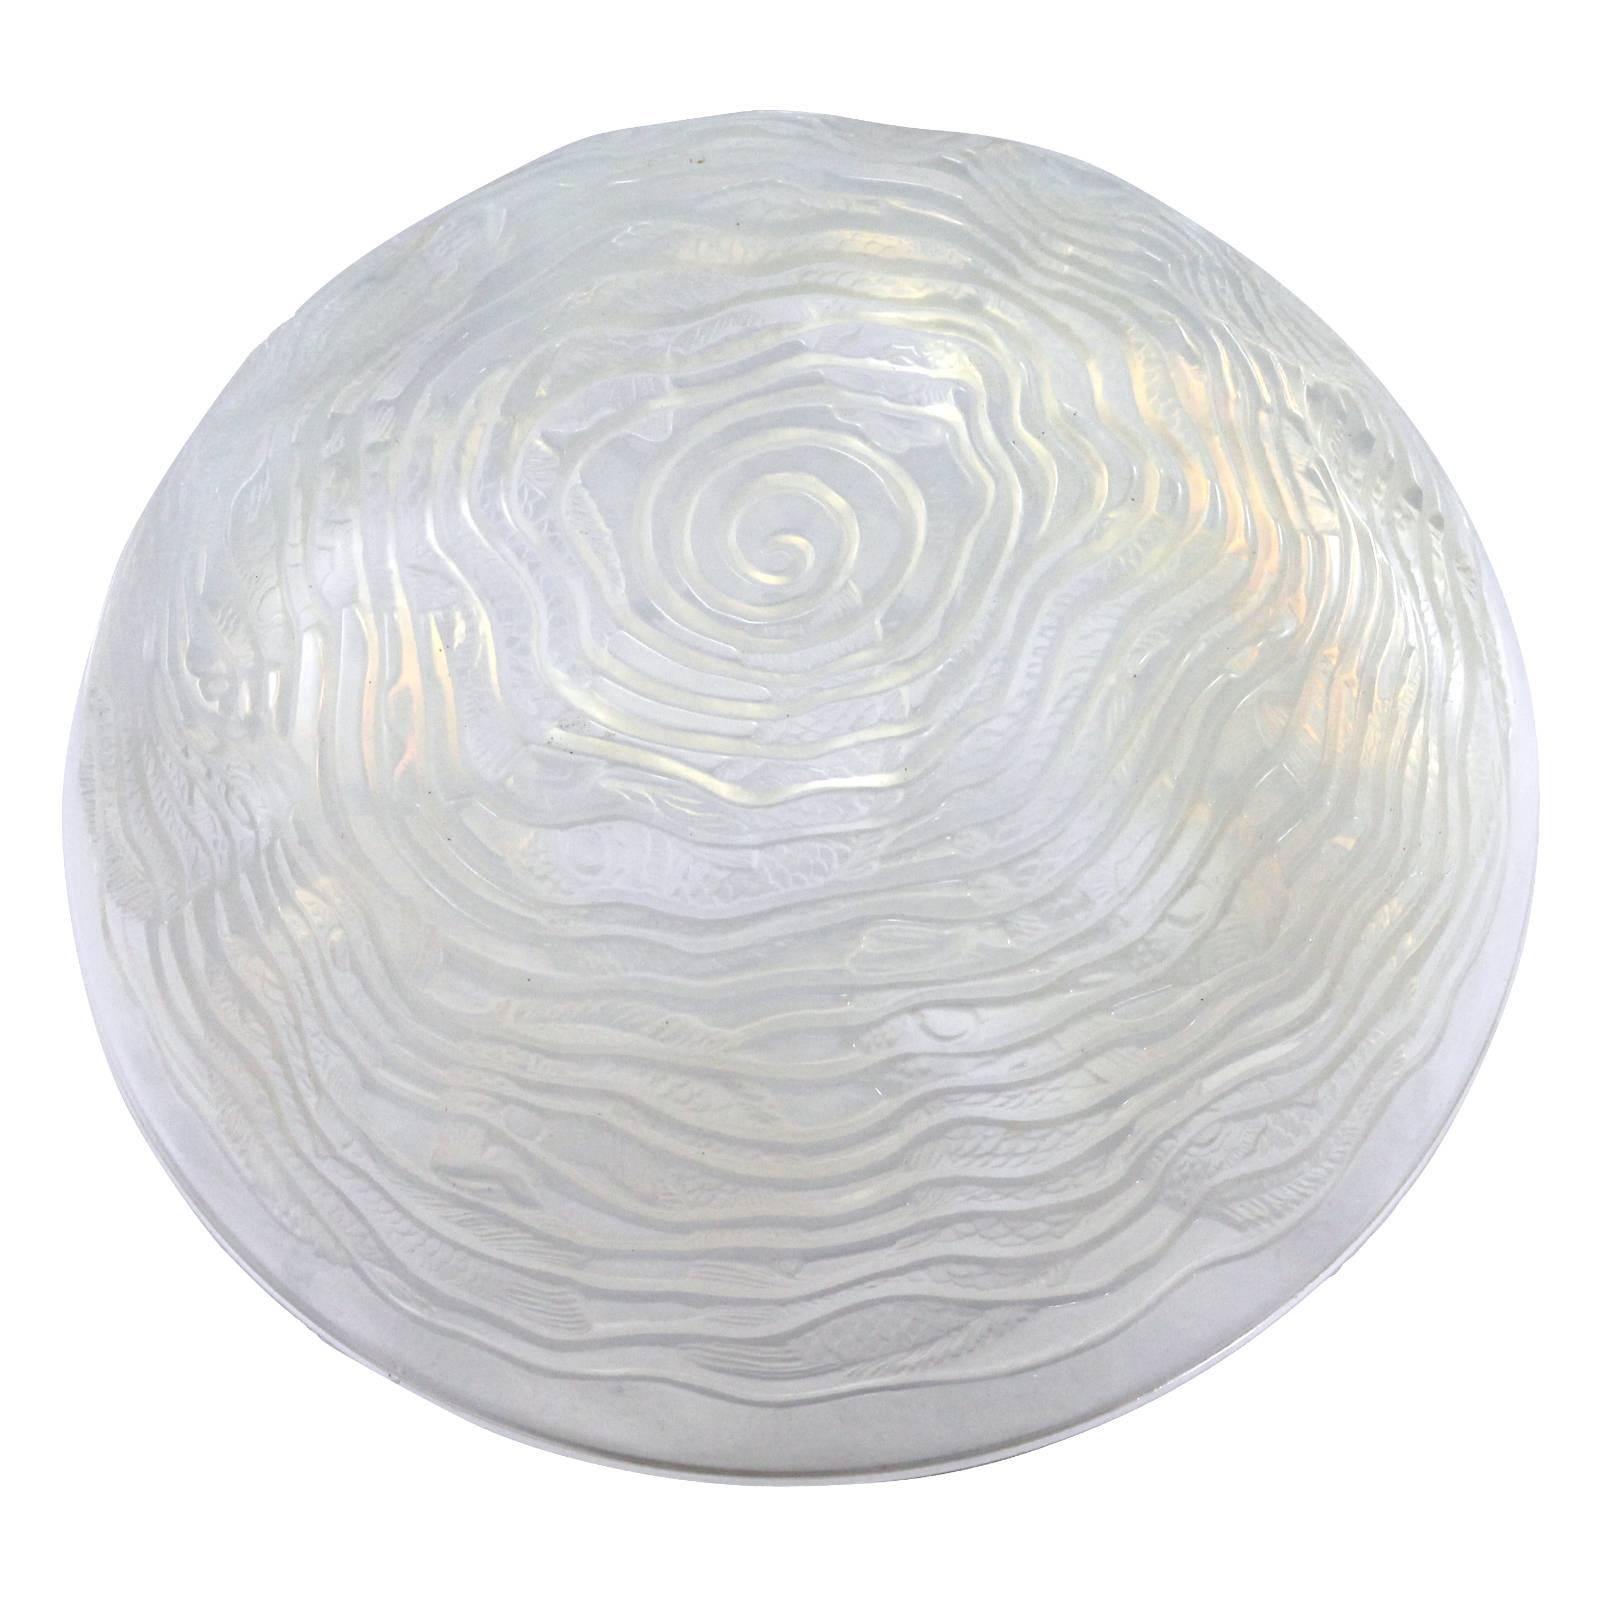 Early 20th Century Art Deco Opalescent Glass 'Dauphin' Bowl by René Lalique For Sale 1